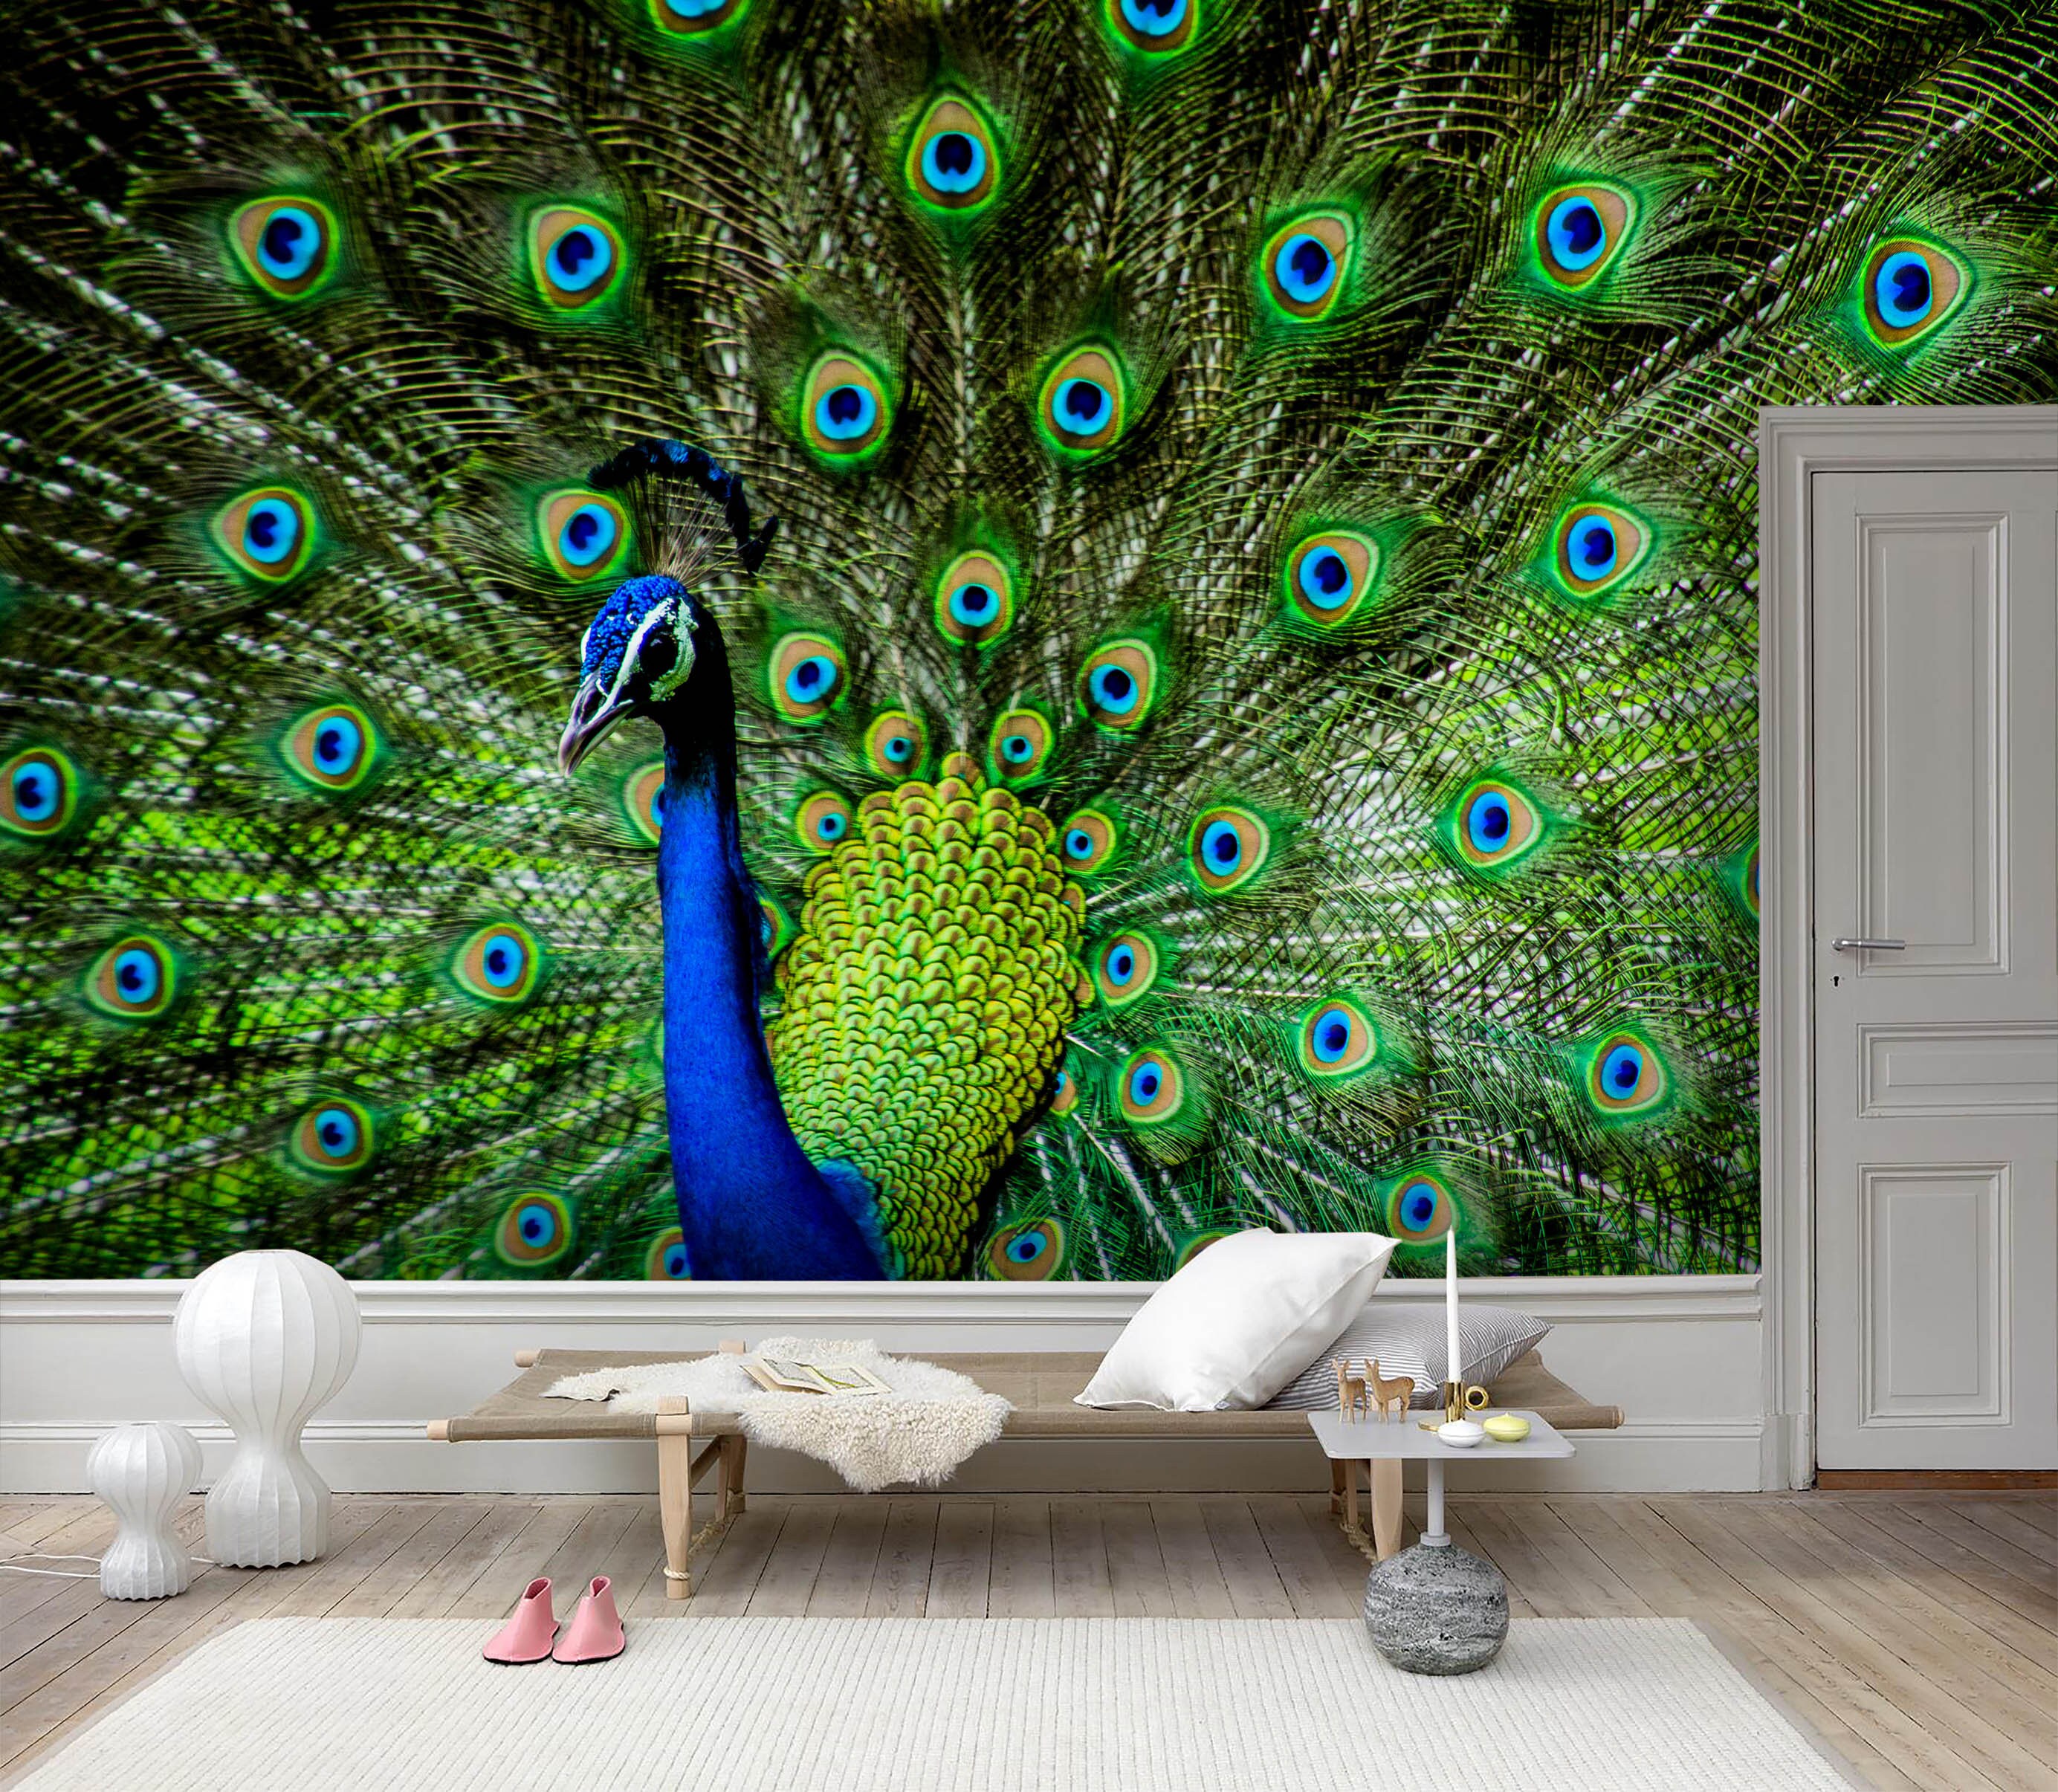 HEINRICHED SelfAdhesive Peacock Feather Design 45 x 1000 Cm Wall Paper for  Bedroom Living Room Cabinet Peel and Stick Decorative Sticker Easy to Cut  and Apply 10 MetersApprox48sqft  Amazonin Home Improvement